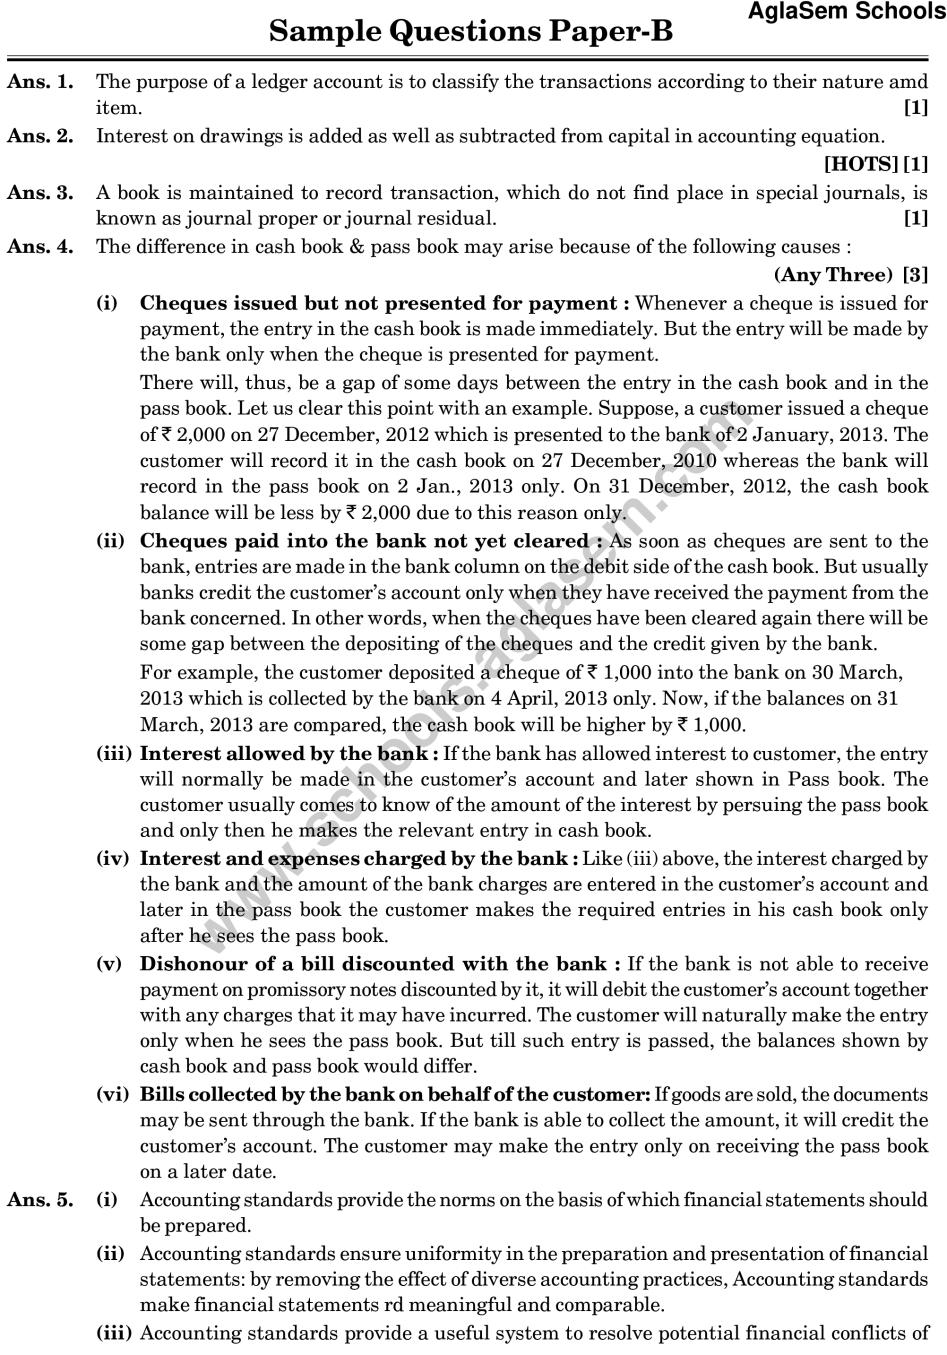 CBSE Class 11 Sample Paper for Accountancy Set b - Page 1